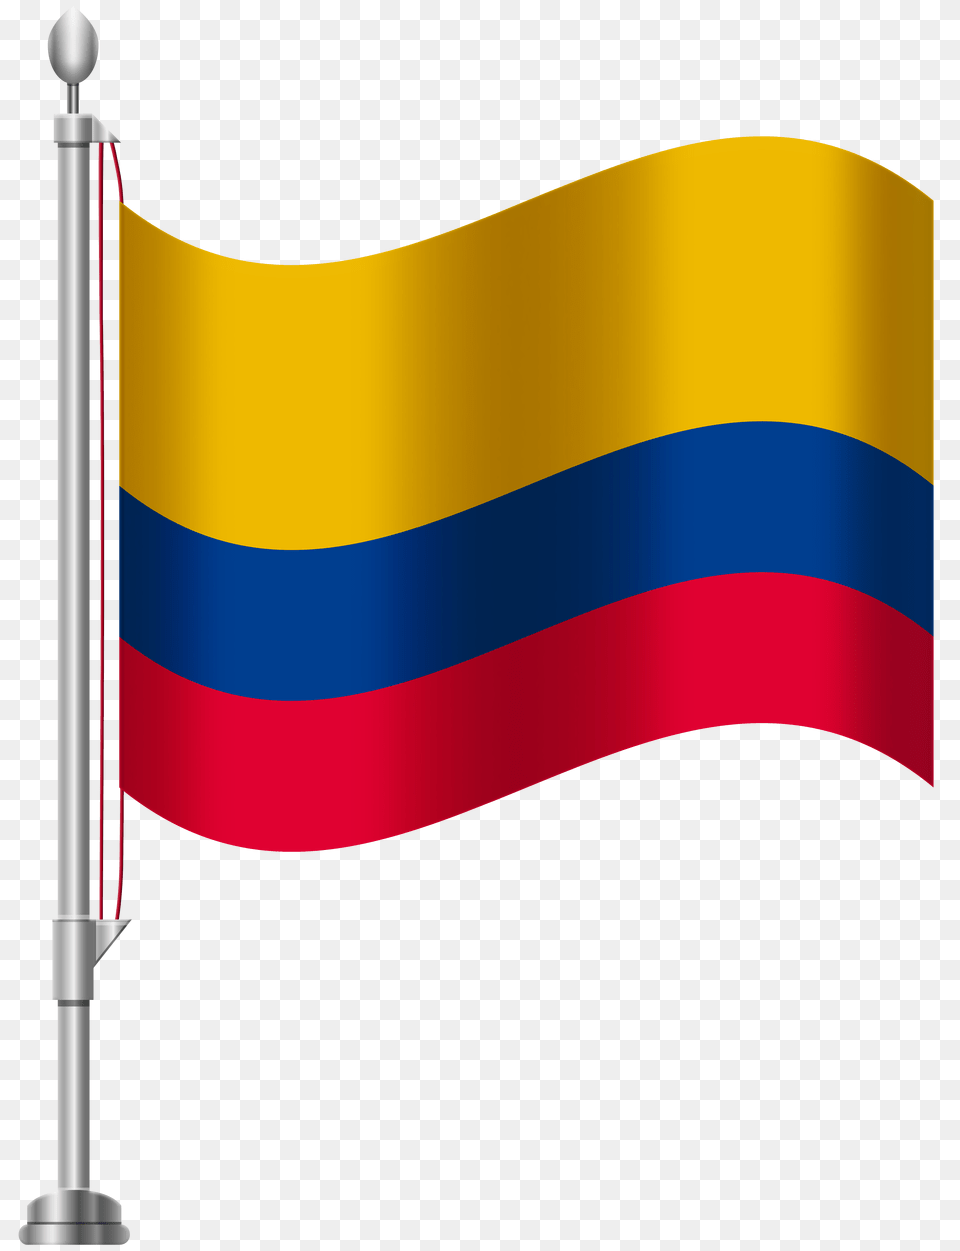 Colombia Flag Clip Art, Smoke Pipe Png